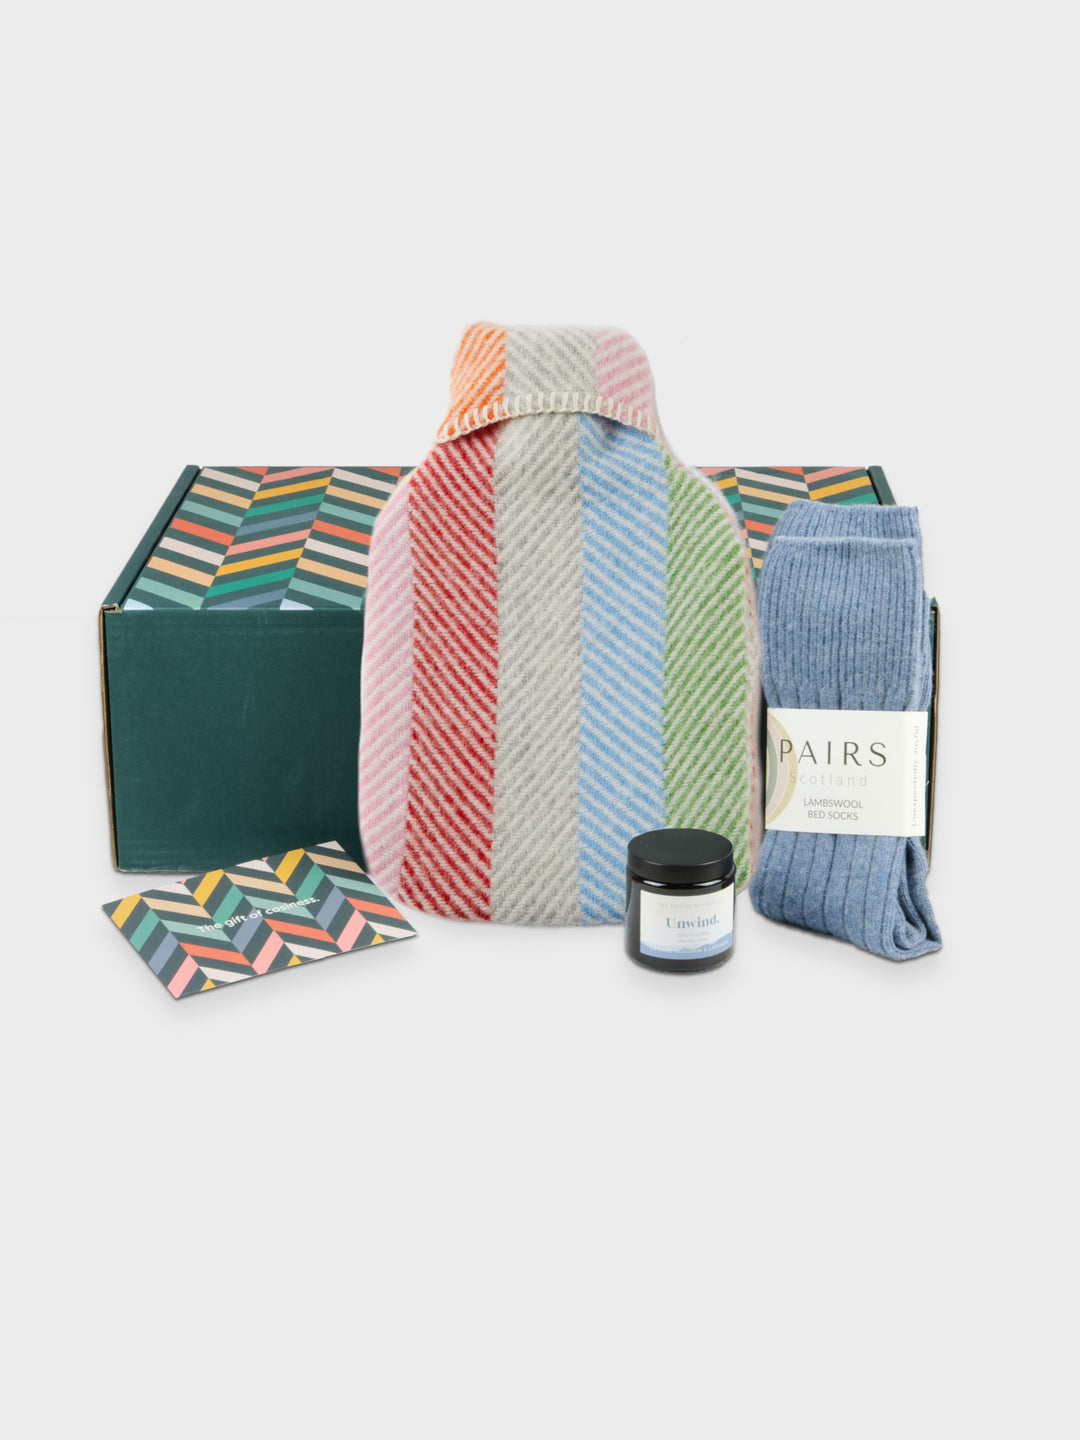 restful relaxing Blanket cosy gift box collection by The British Blanket Company